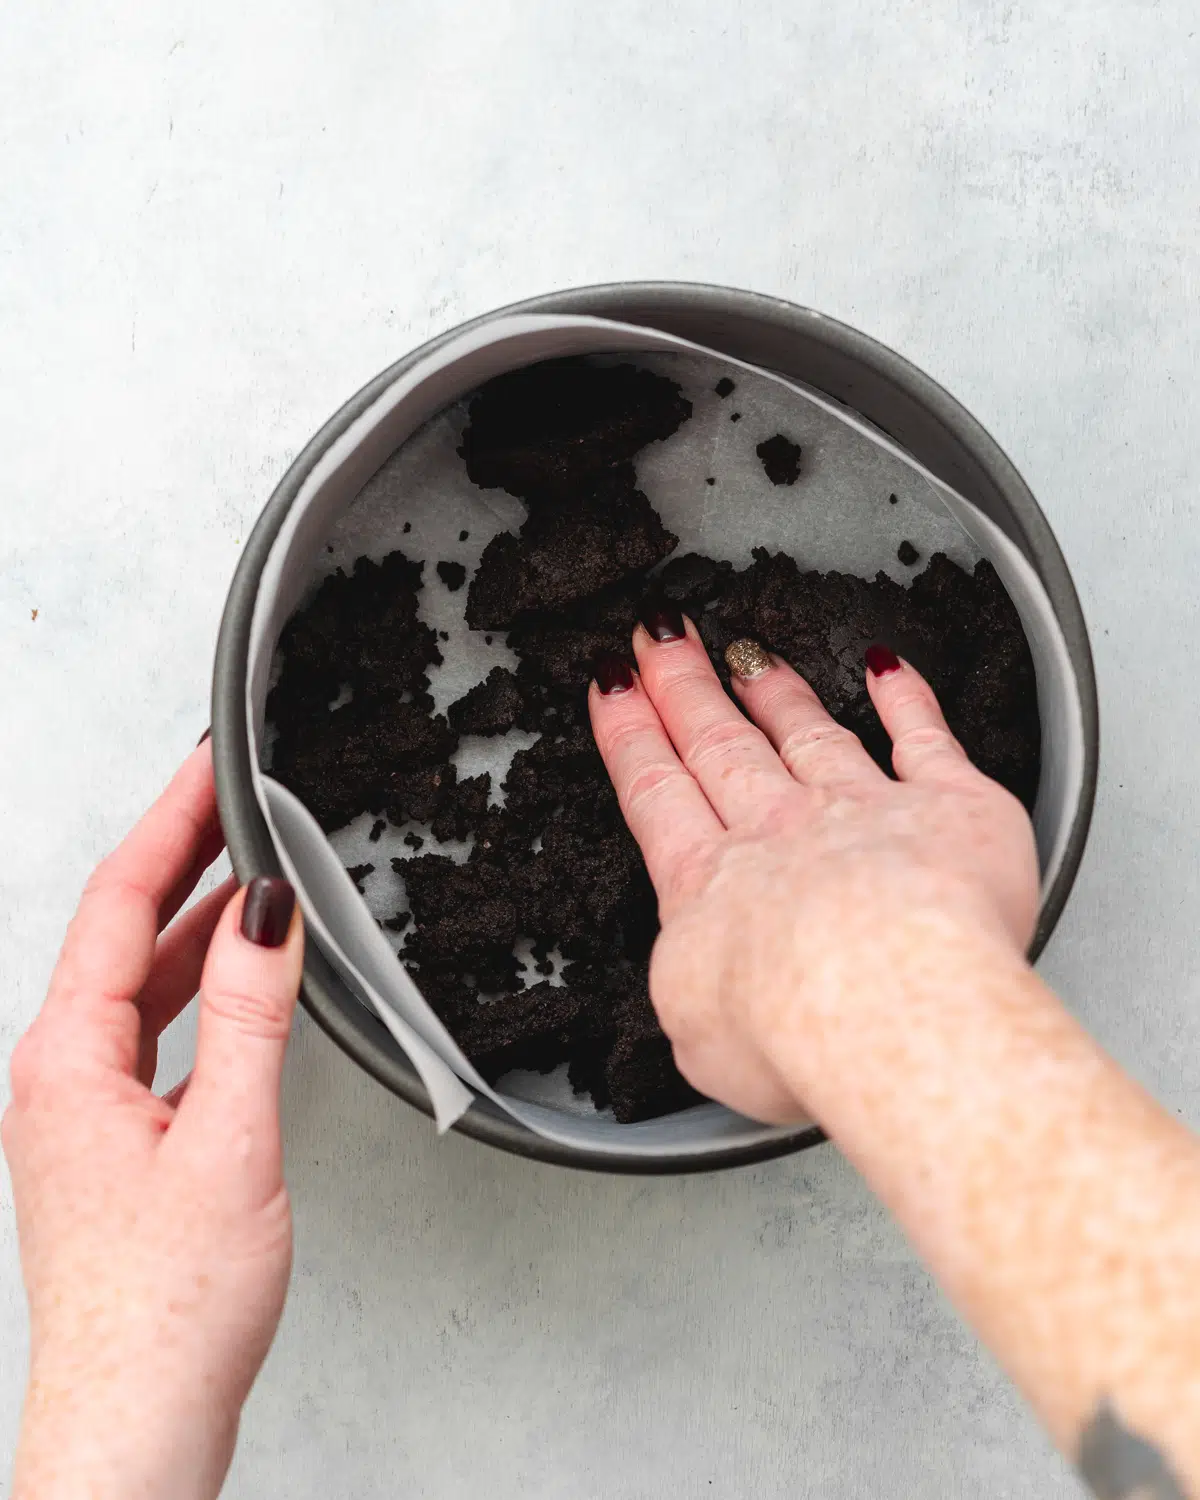 hands pressing cookie crust into the base of a cake tin.